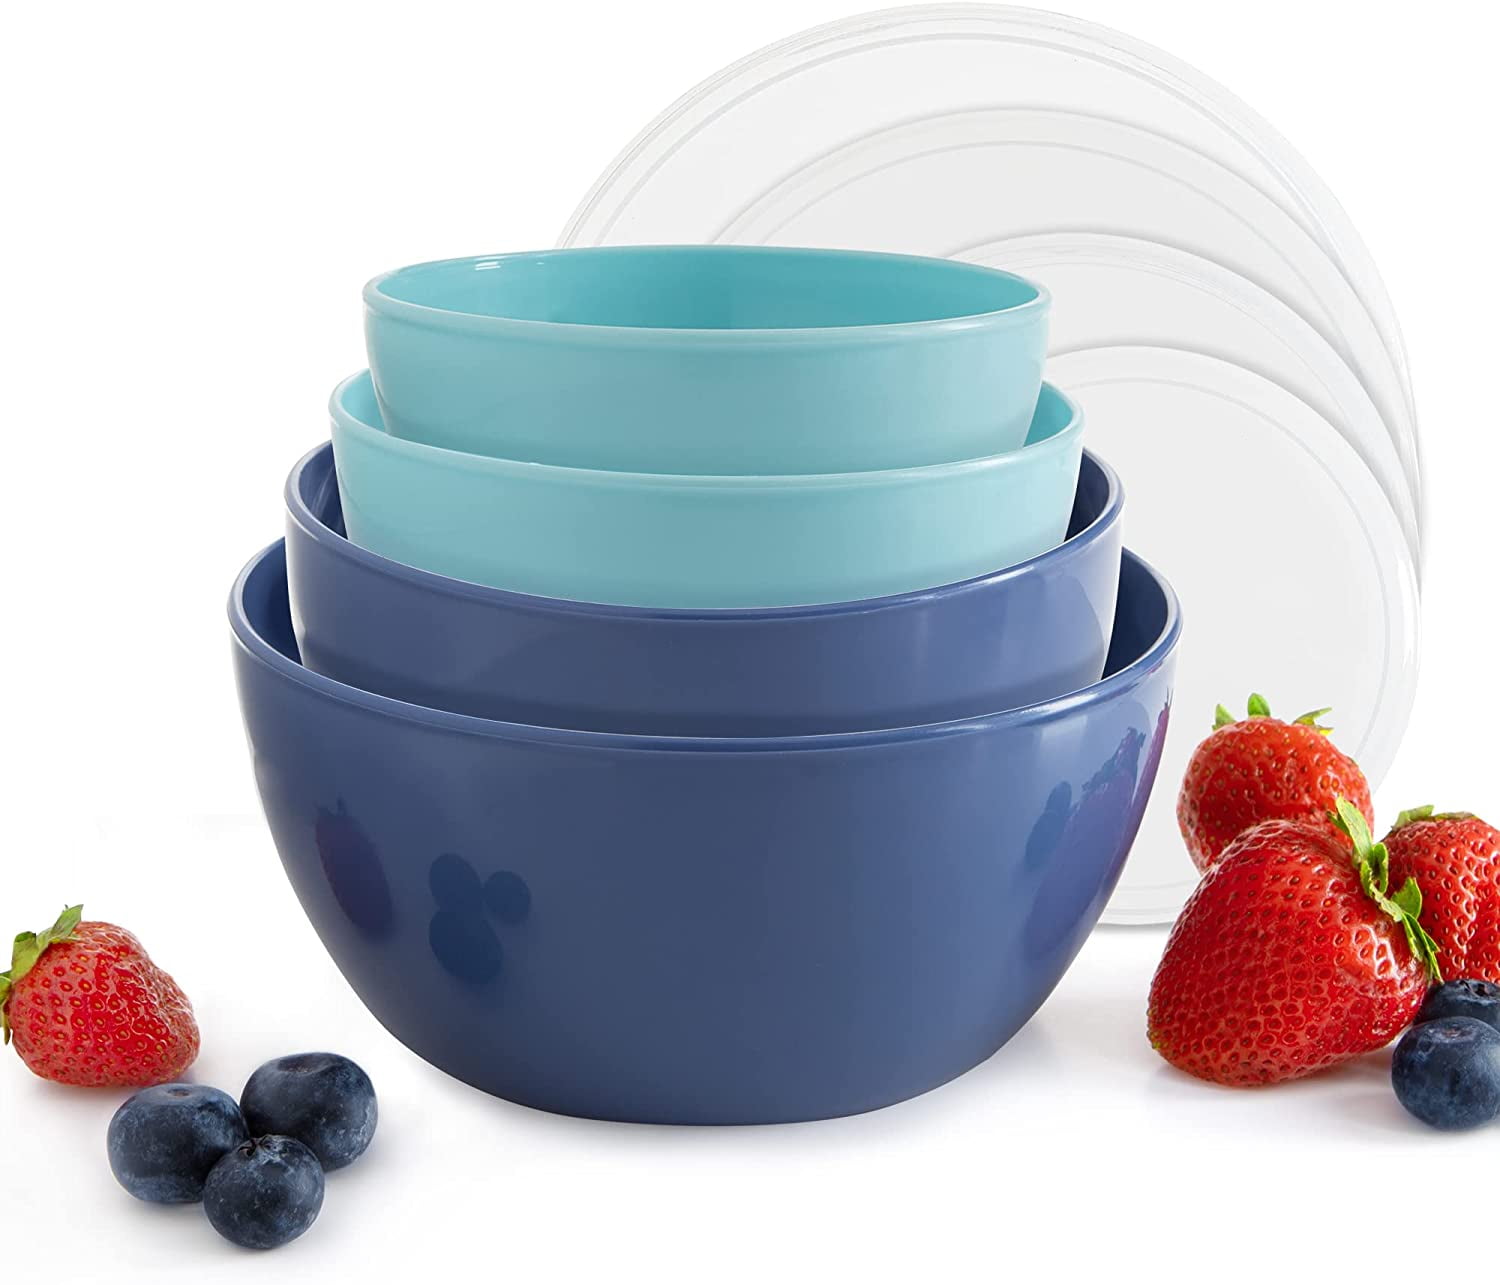 Cook With Color cook with color prep bowls - wide mixing bowls